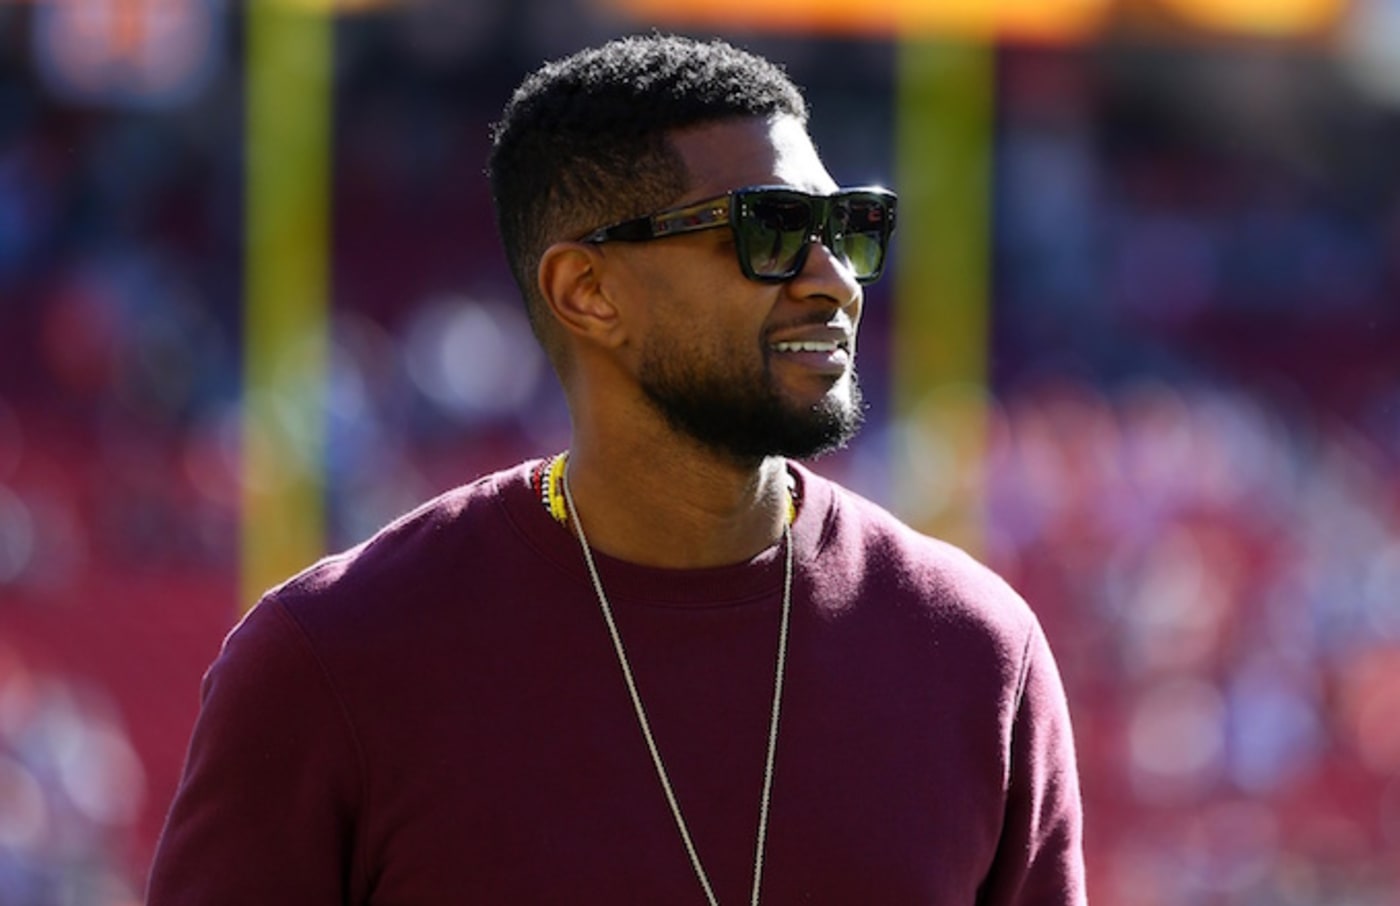 Usher on the field before Super Bowl 50.